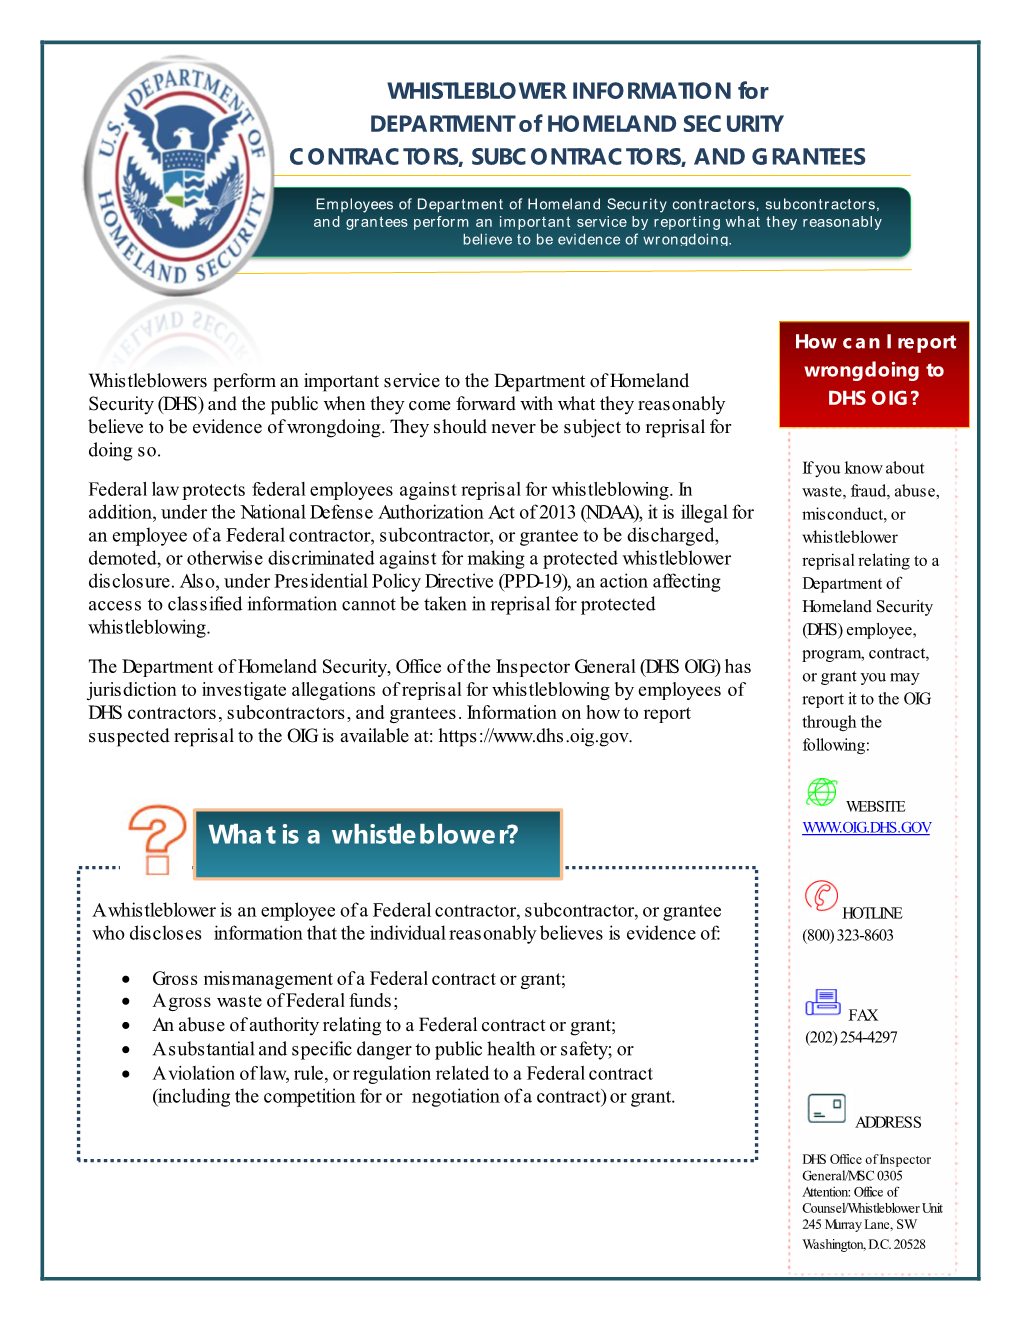 WHISTLEBLOWER INFORMATION for DEPARTMENT of HOMELAND SECURITY CONTRACTORS, SUBCONTRACTORS, and GRANTEES